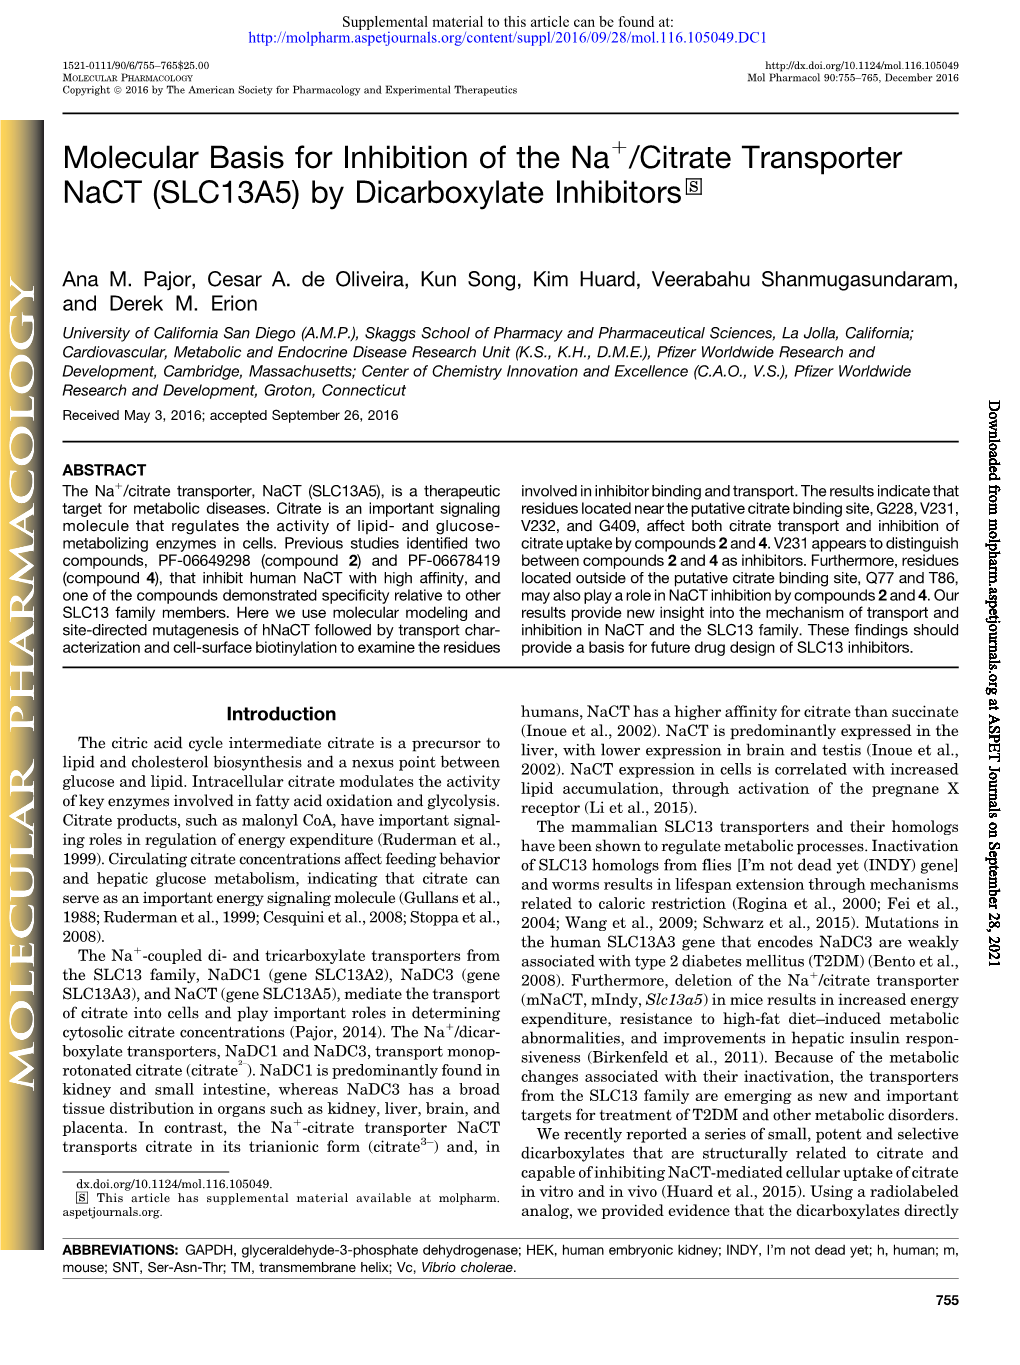 Molecular Basis for Inhibition of the Na+/Citrate Transporter Nact